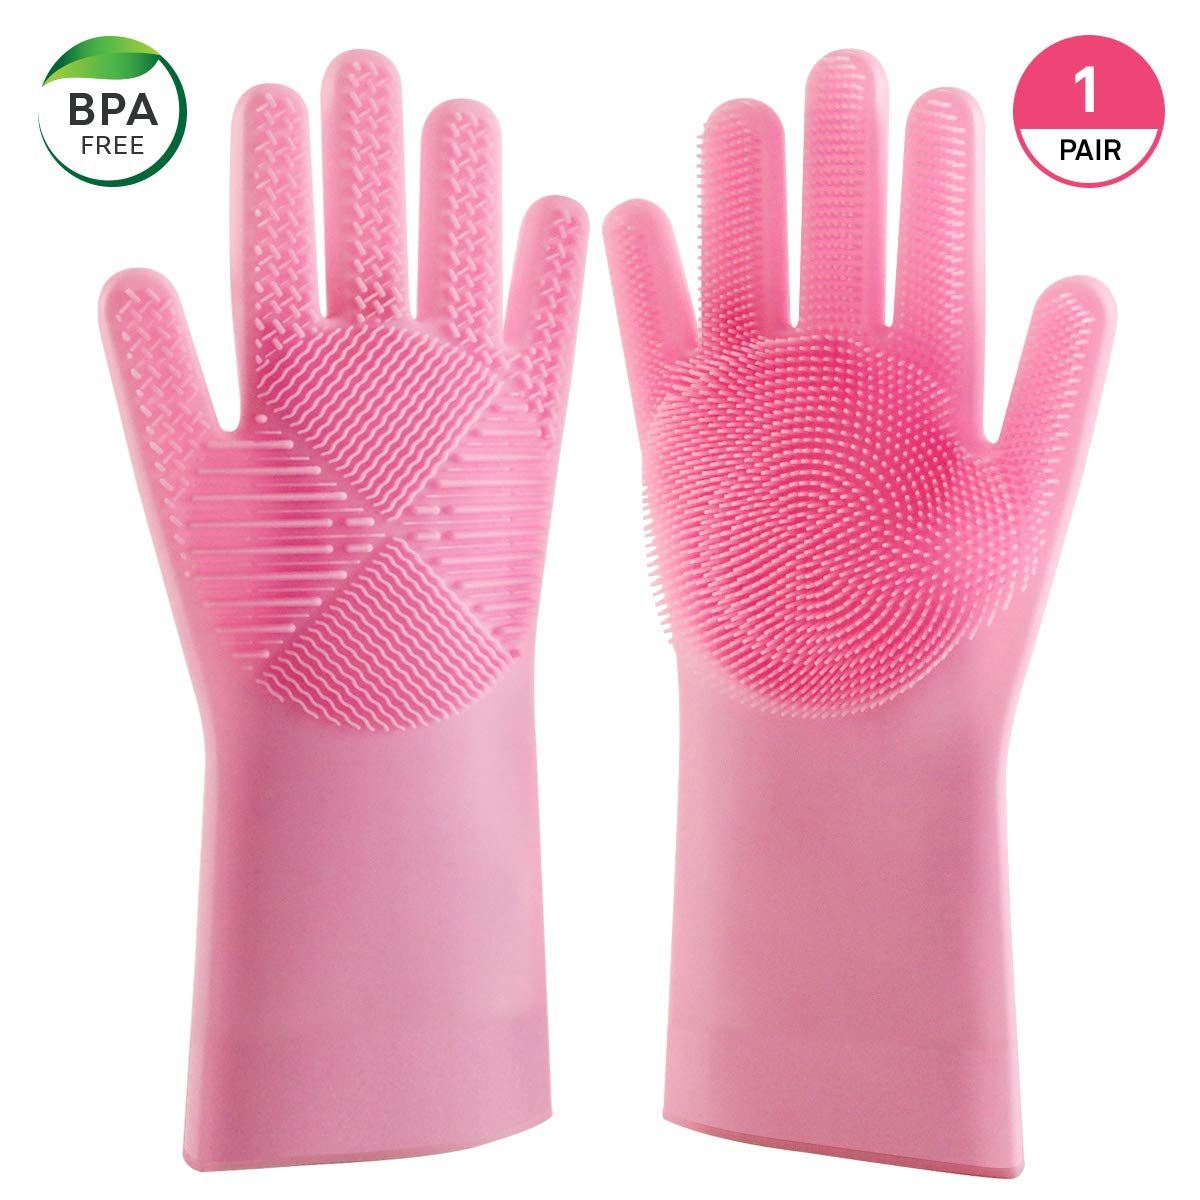 Blitzby Magic Wash, New Design Reusable Silicone Dishwashing Scrubber, Cleaning Brush Gloves for Kitchen, Household, Dish Washing, Washing The Car, Pink